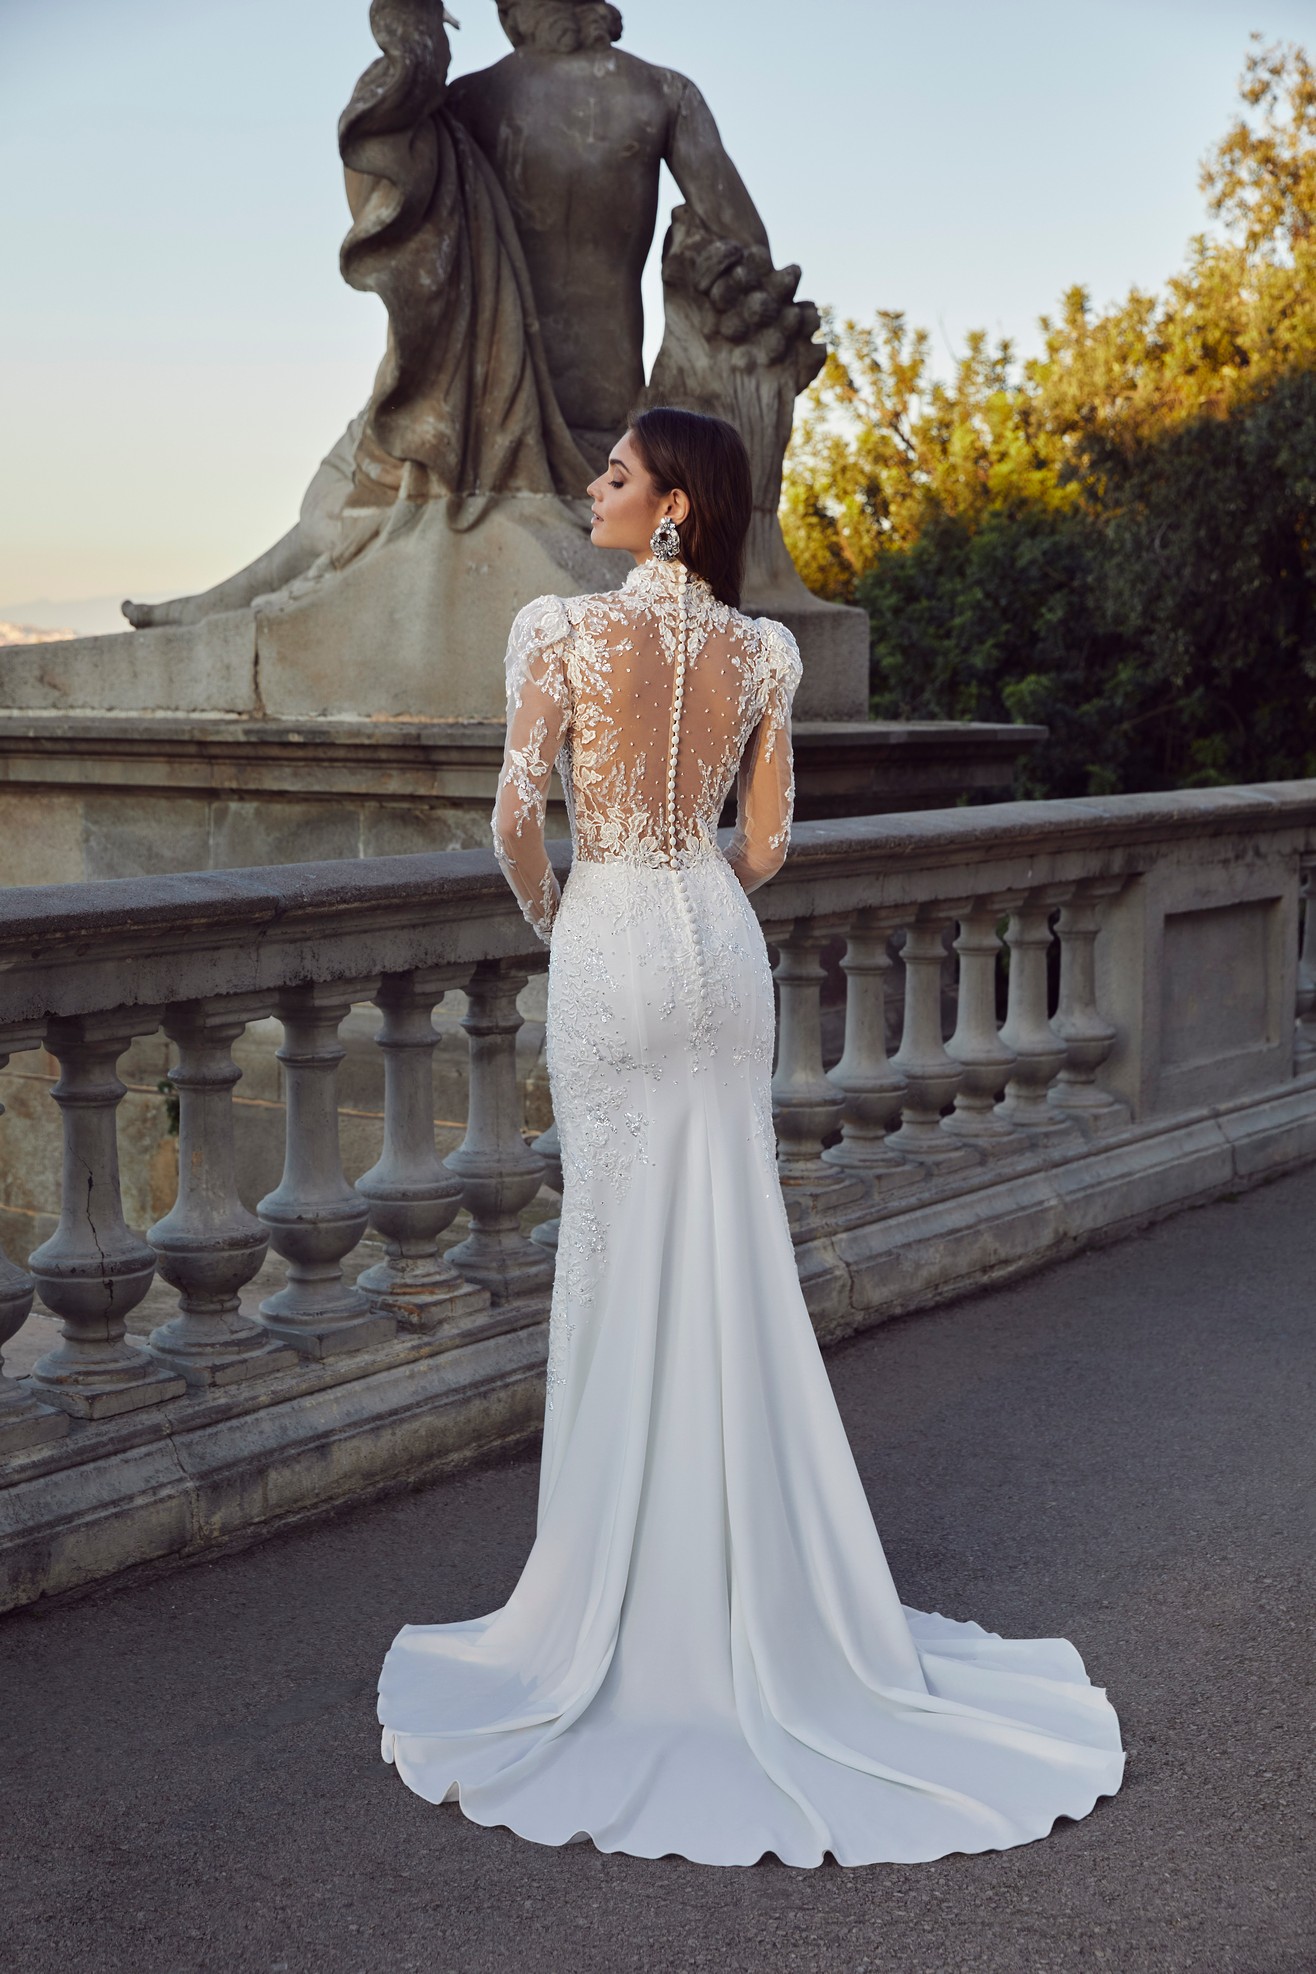 Back profile of woman wearing fitted white wedding dress with sheer illusion back